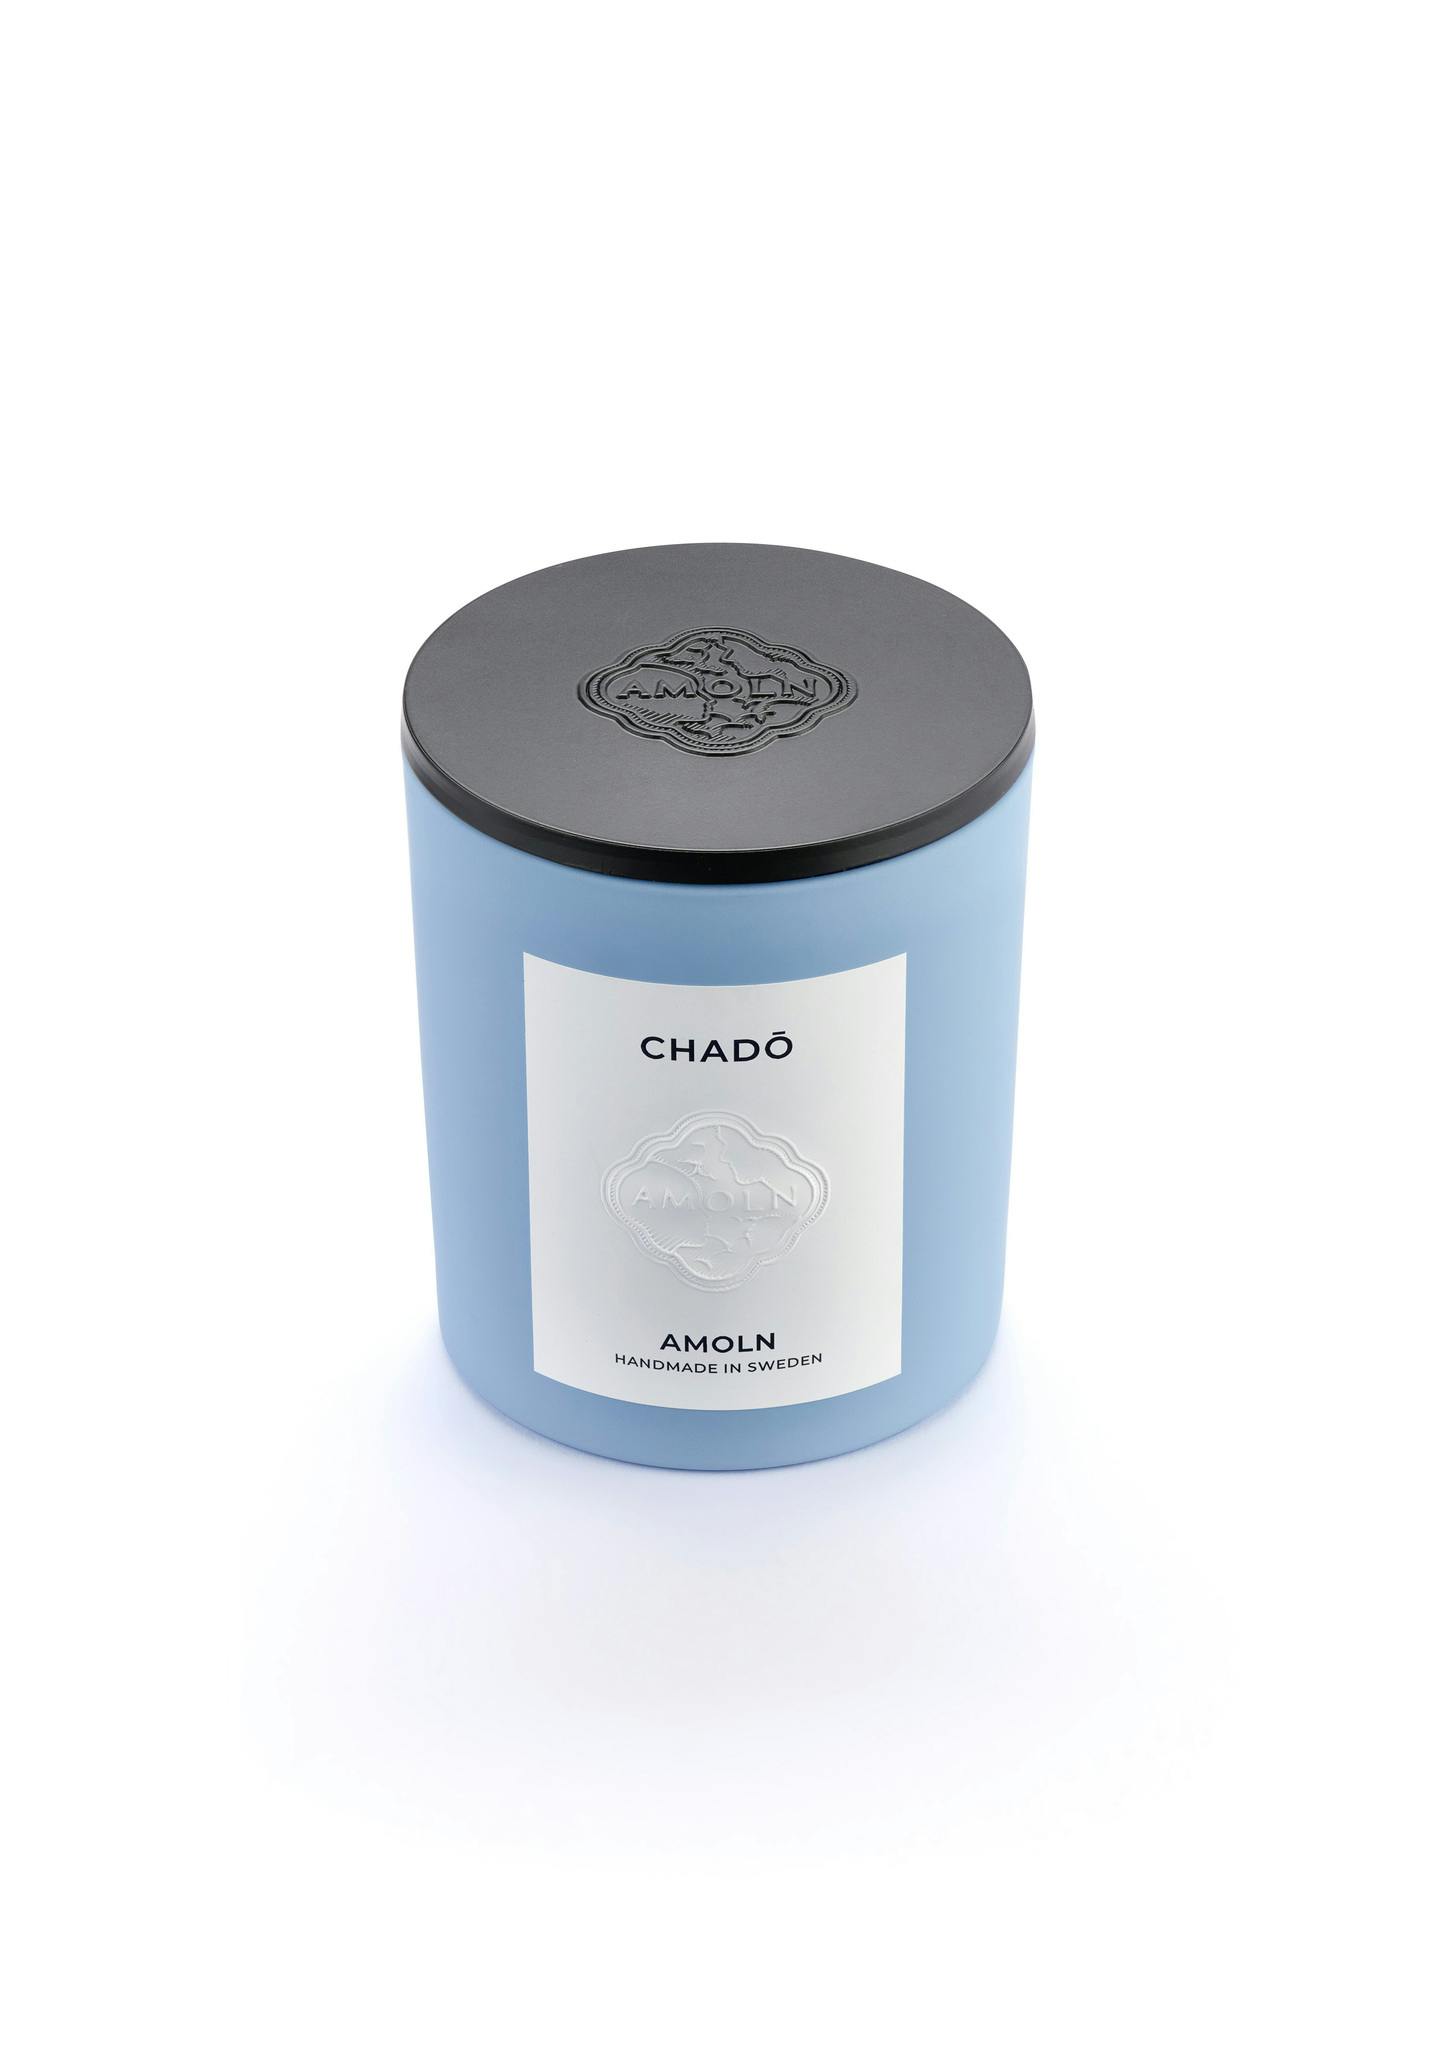 Light blue ceramic candle jar with a vegan, scented candle in blue wax for a luxurious gift. Handcrafted by artisans in Sweden. Sustainably & ethically made.